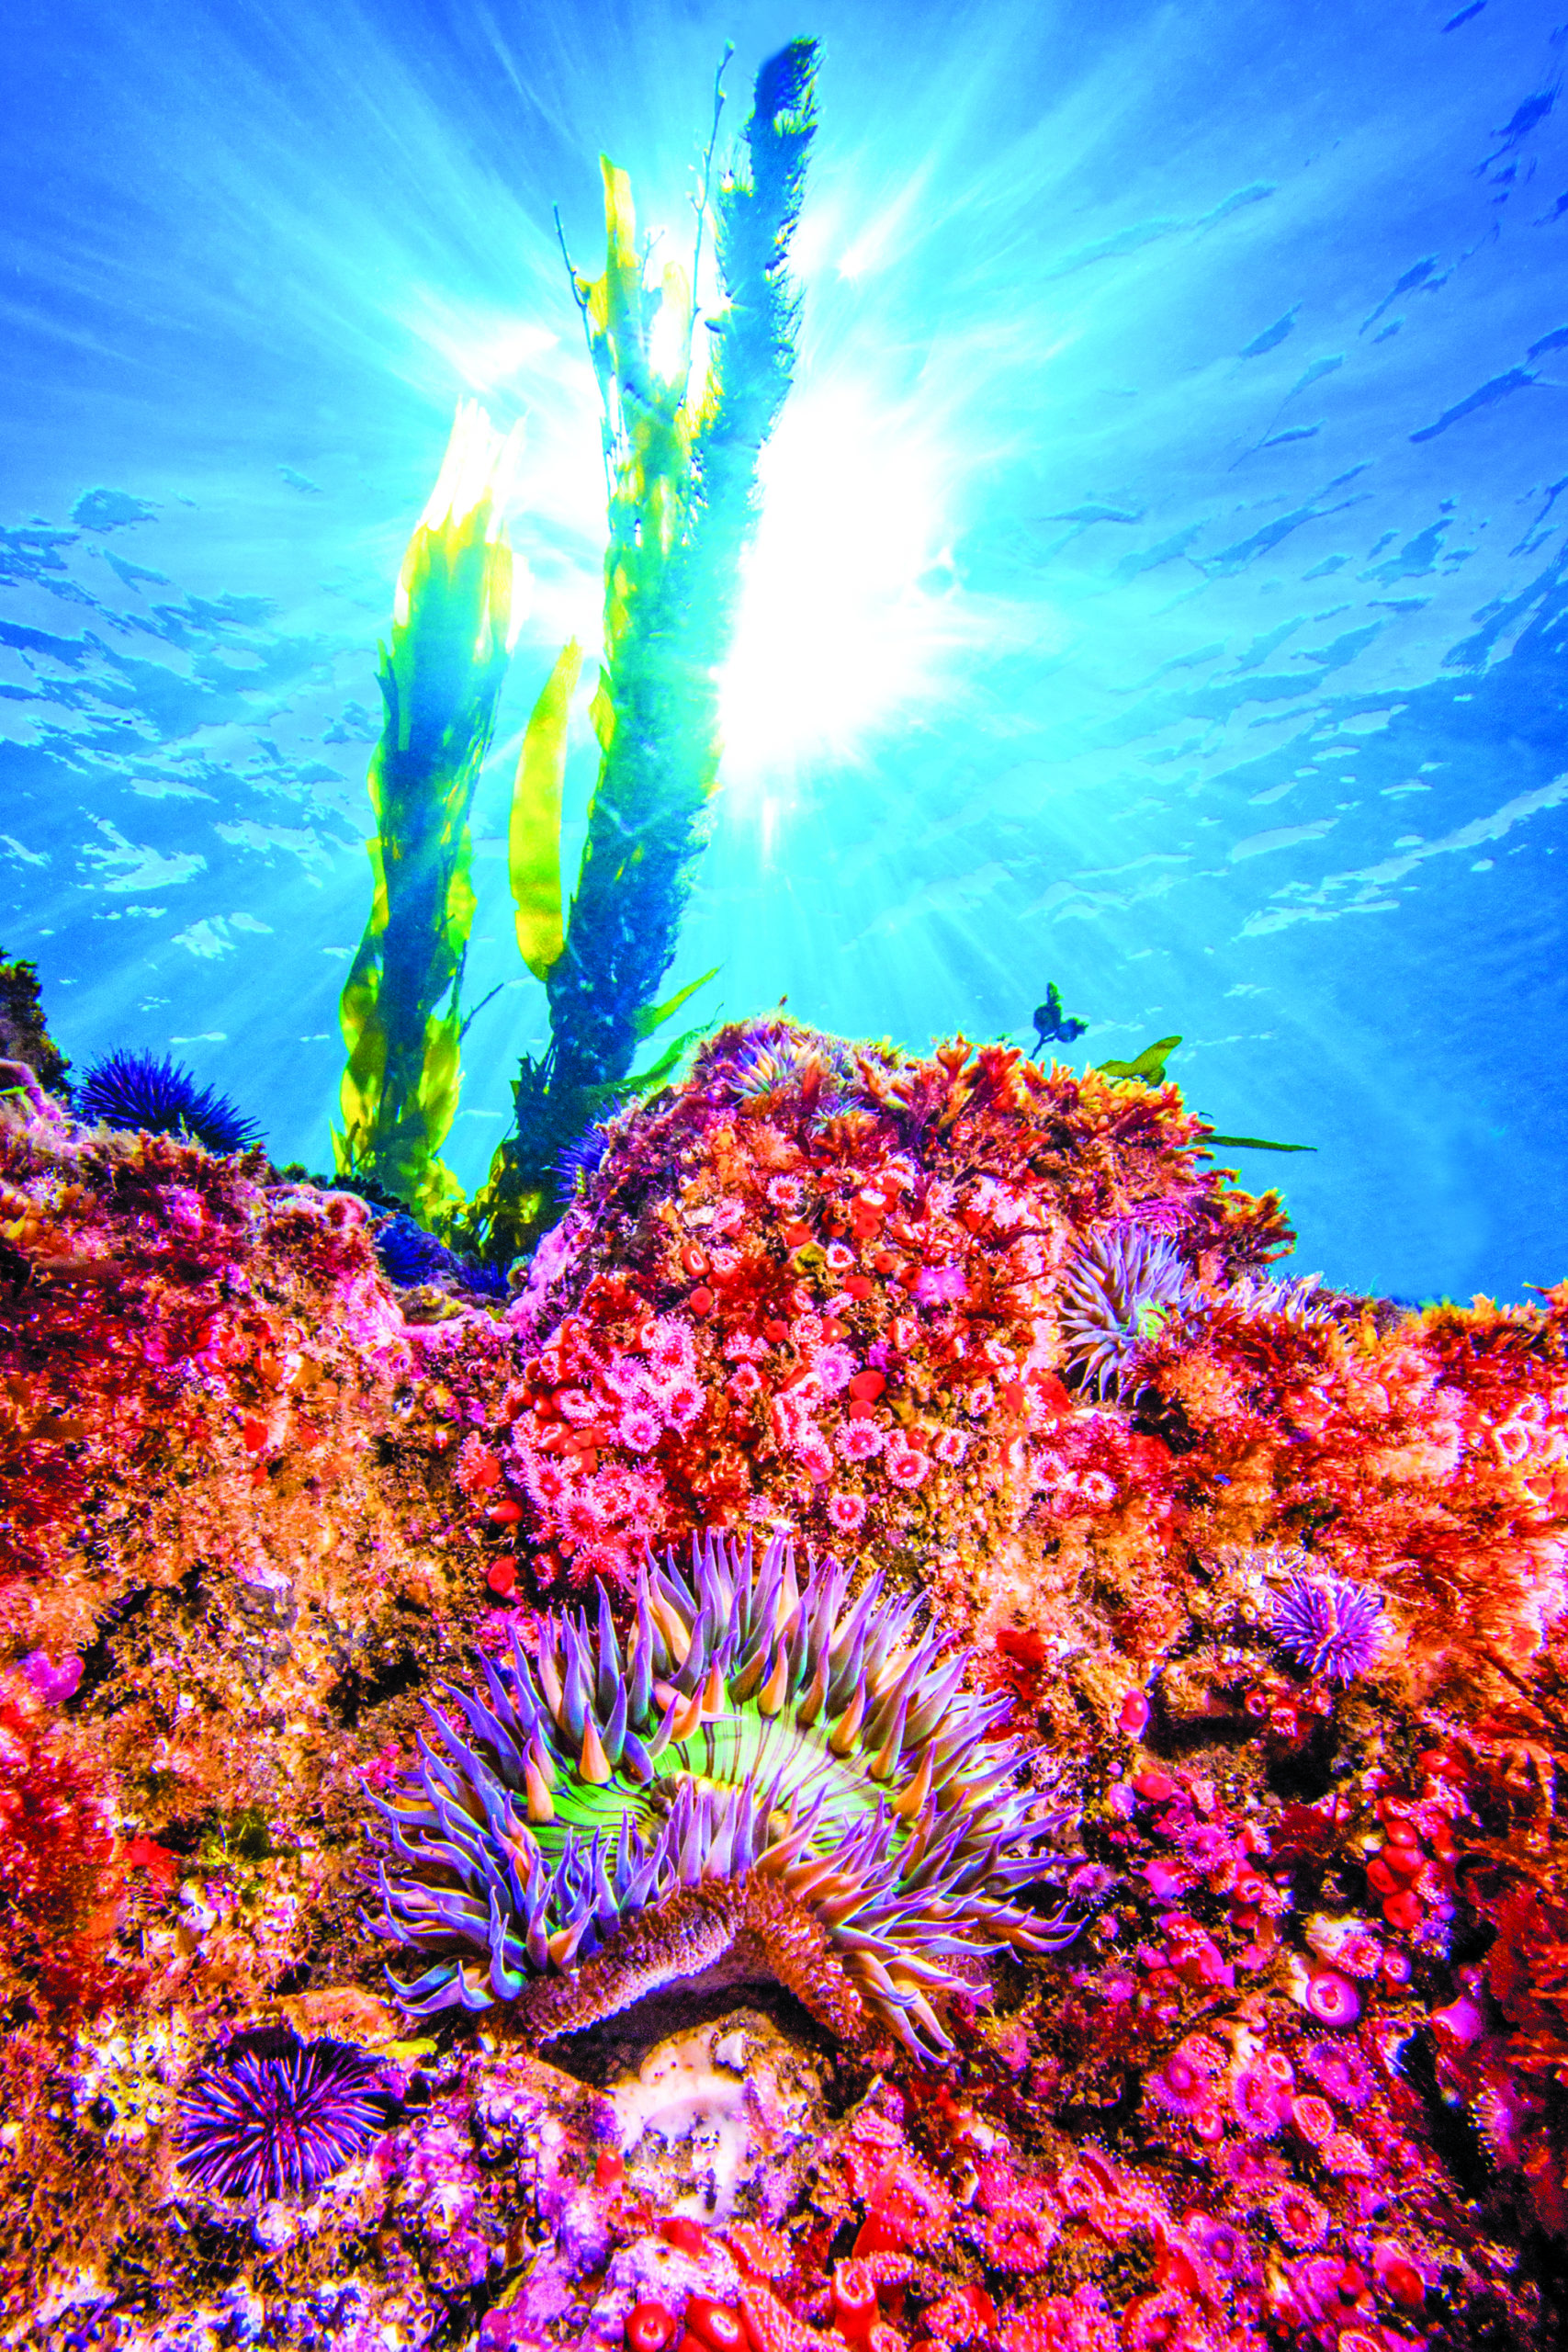 An anemone glows under the suns rays at Anacapa Island in the Channel Islands National Park.